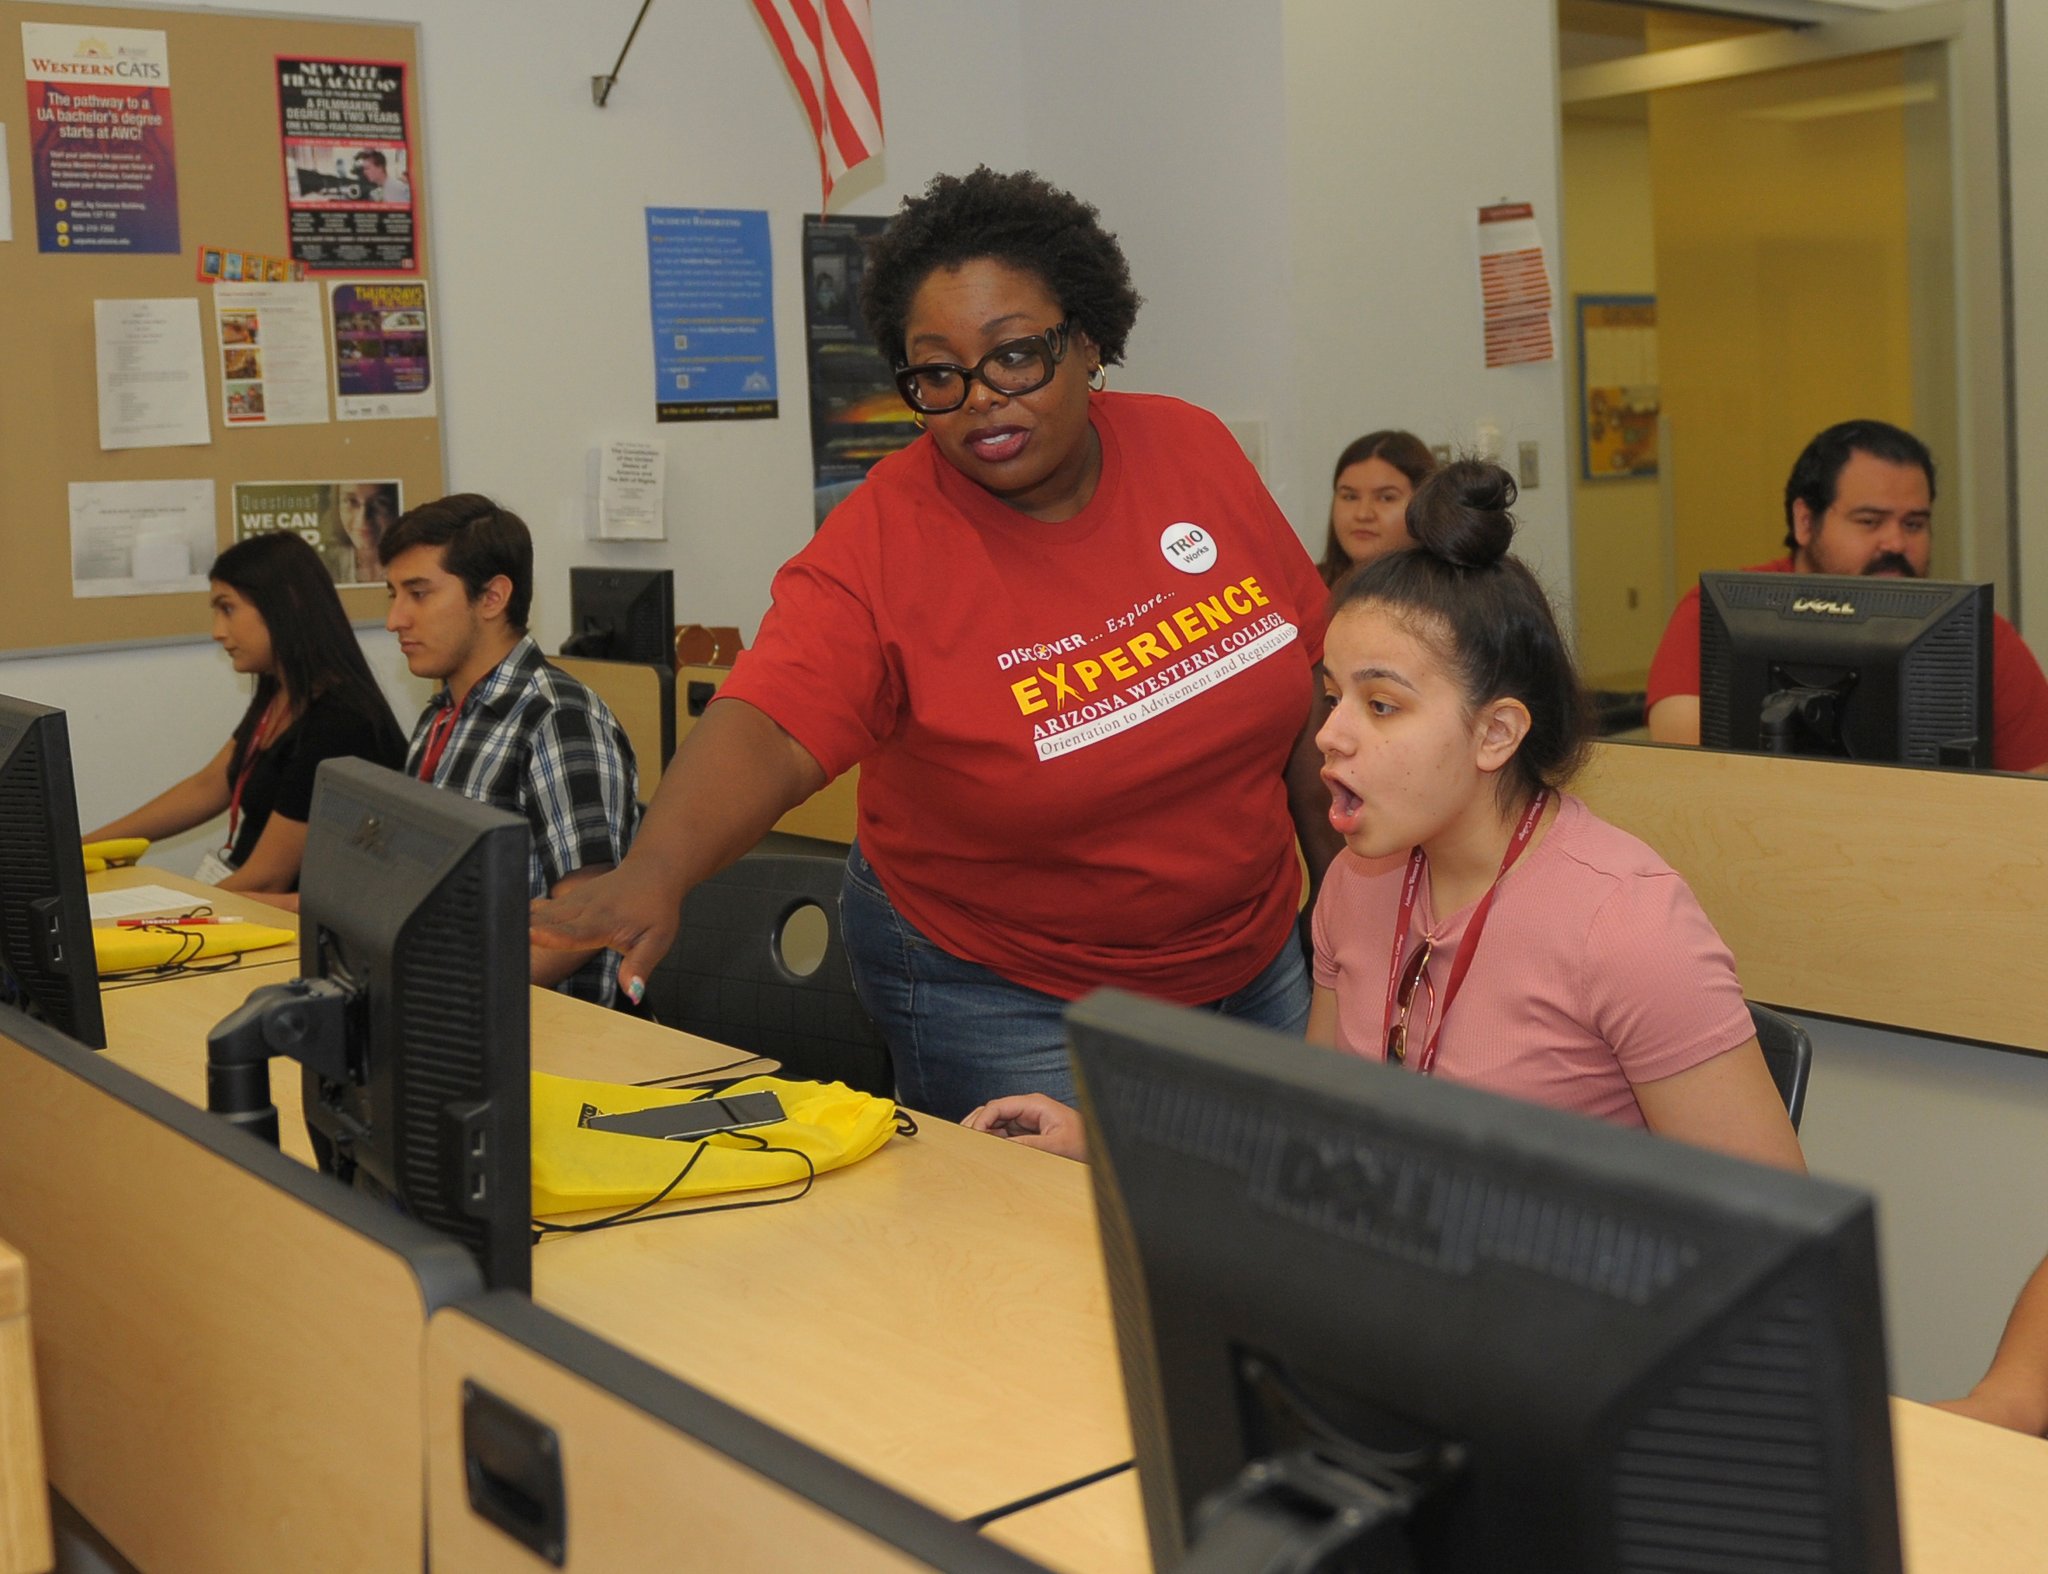 African-American woman points to a computer screen as she helps a student.